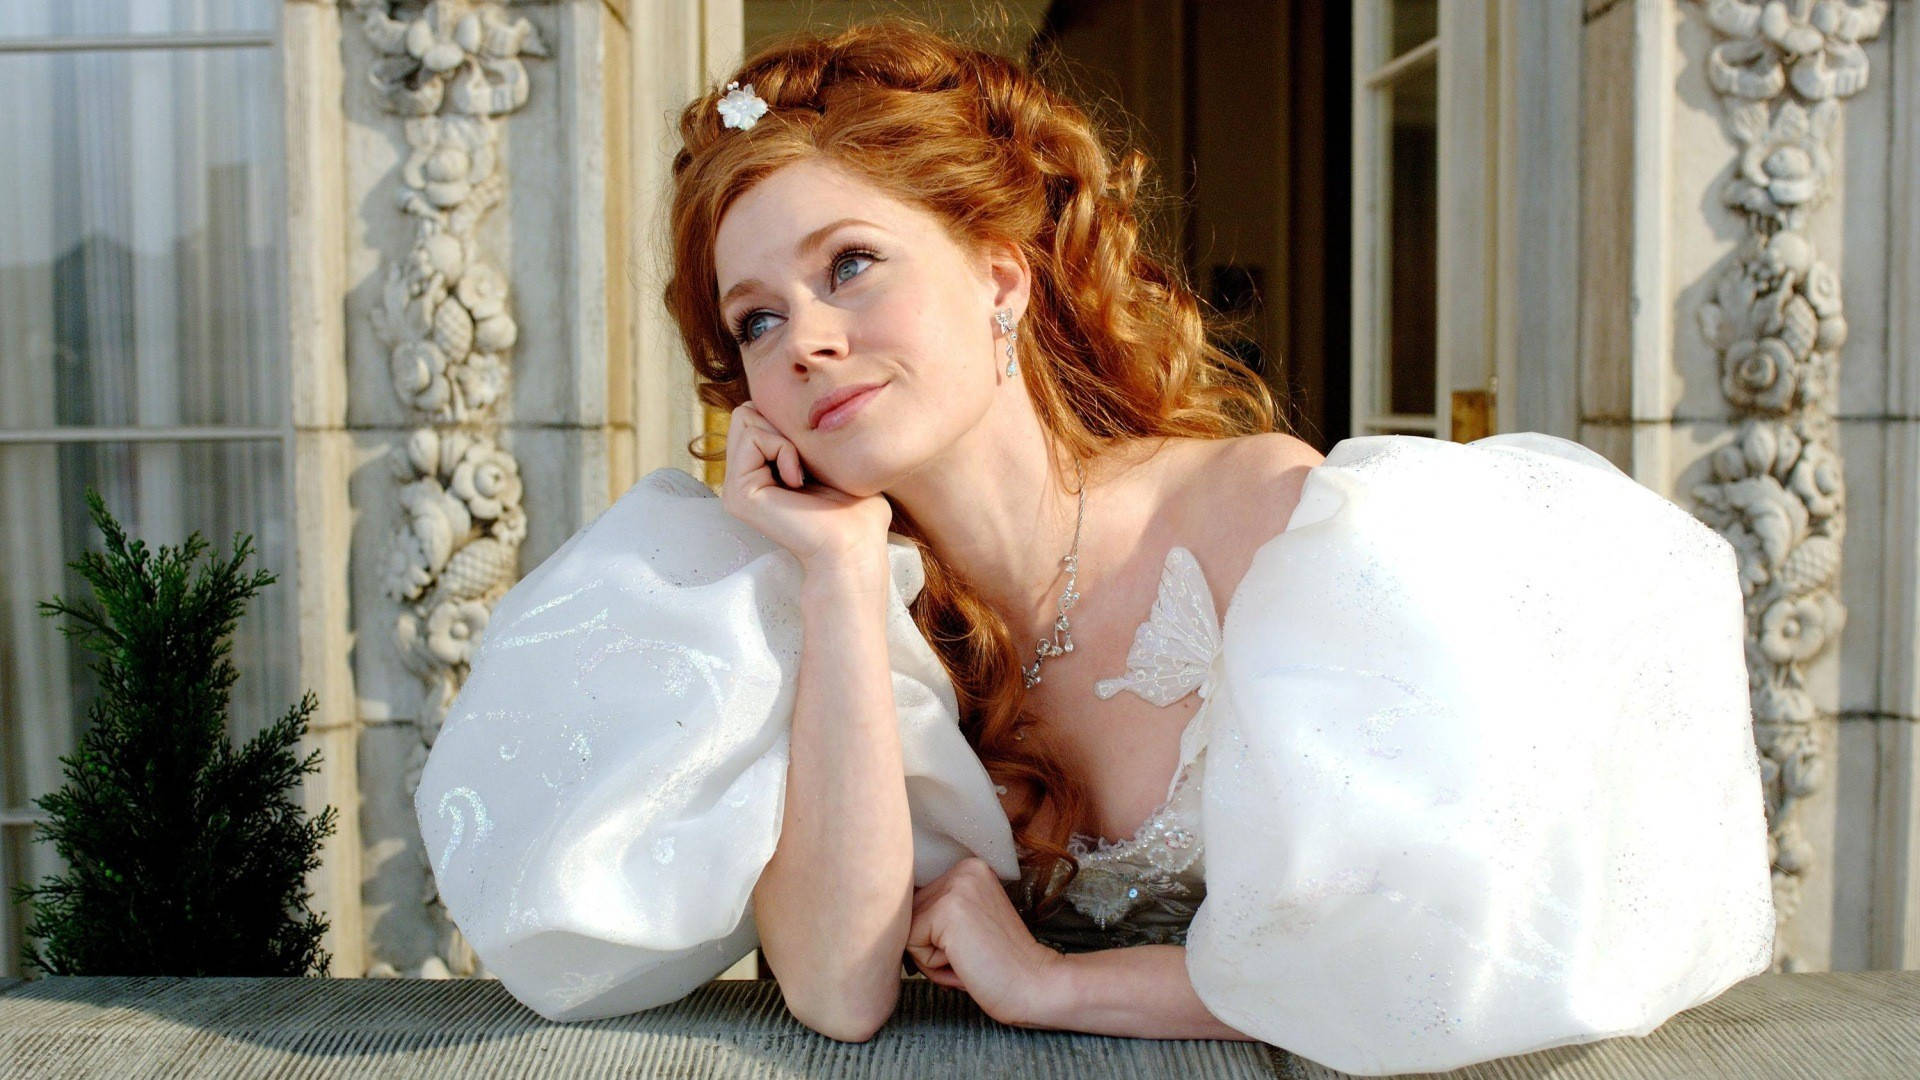 Giselle In The Enchanted Movie Wallpaper